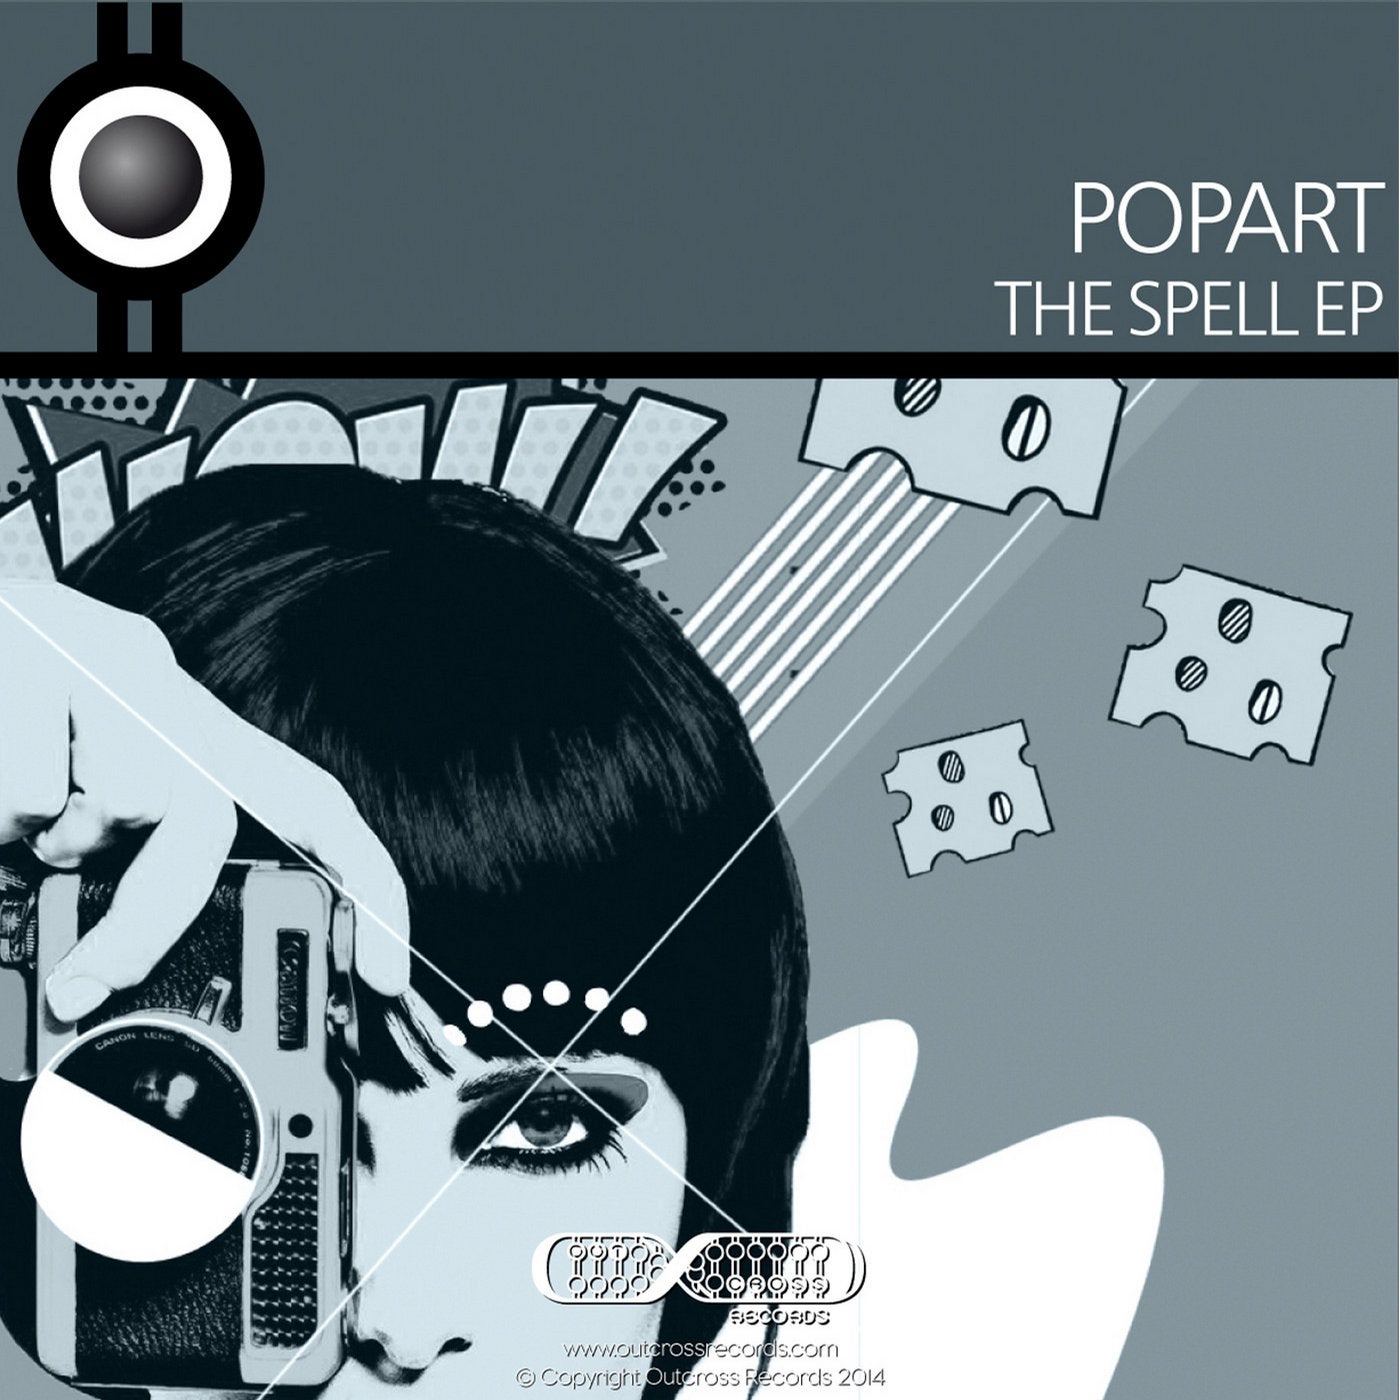 The Spell EP